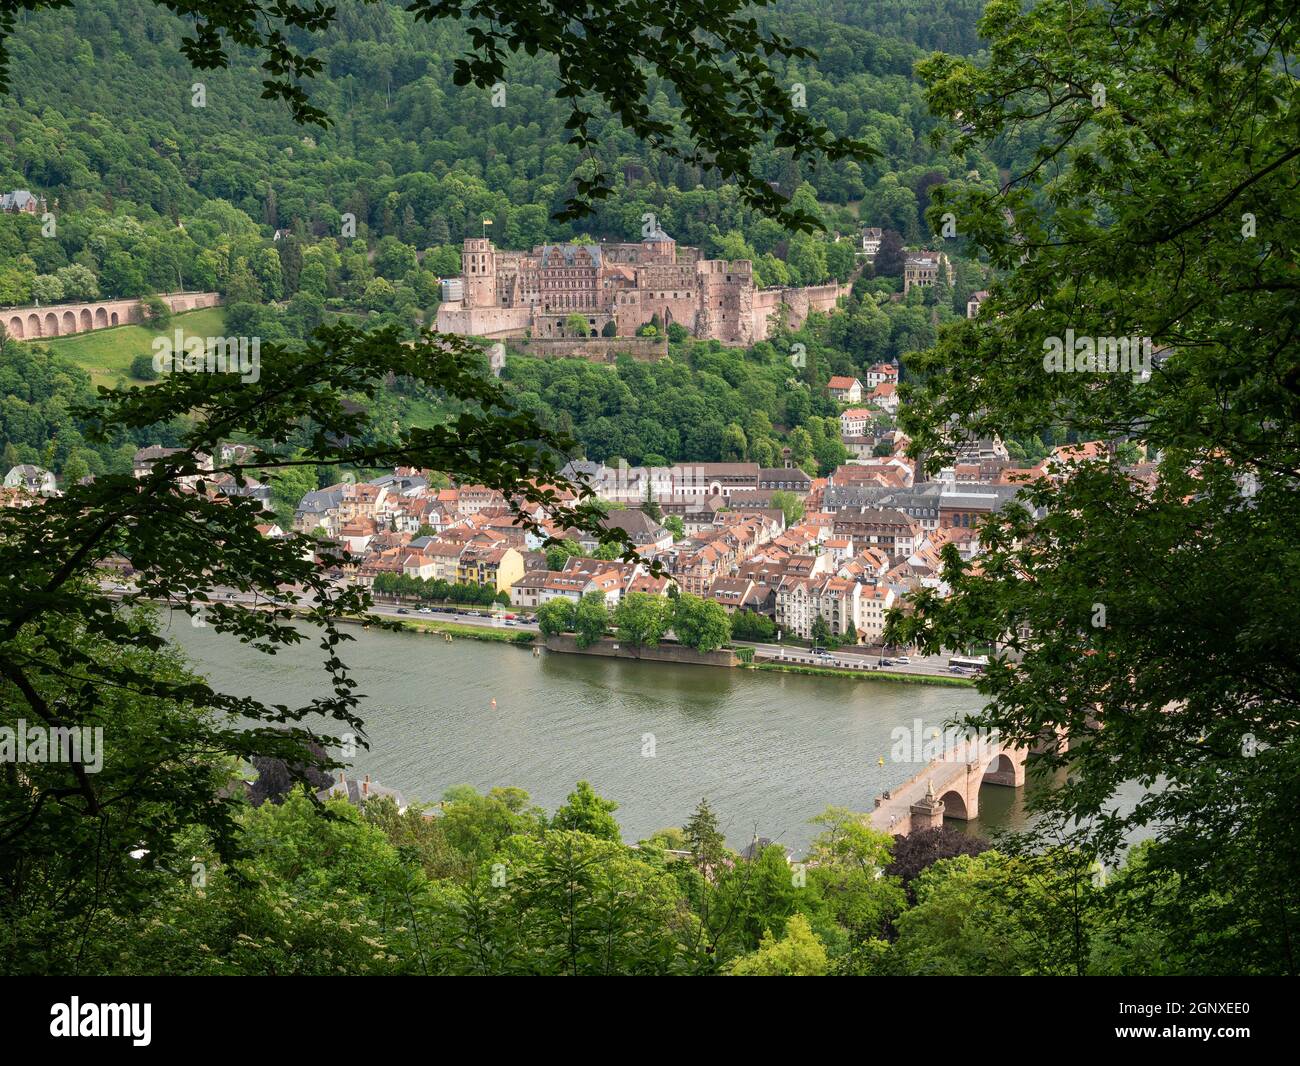 View of the castle and the city of Heidelberg with river and bridge Stock Photo